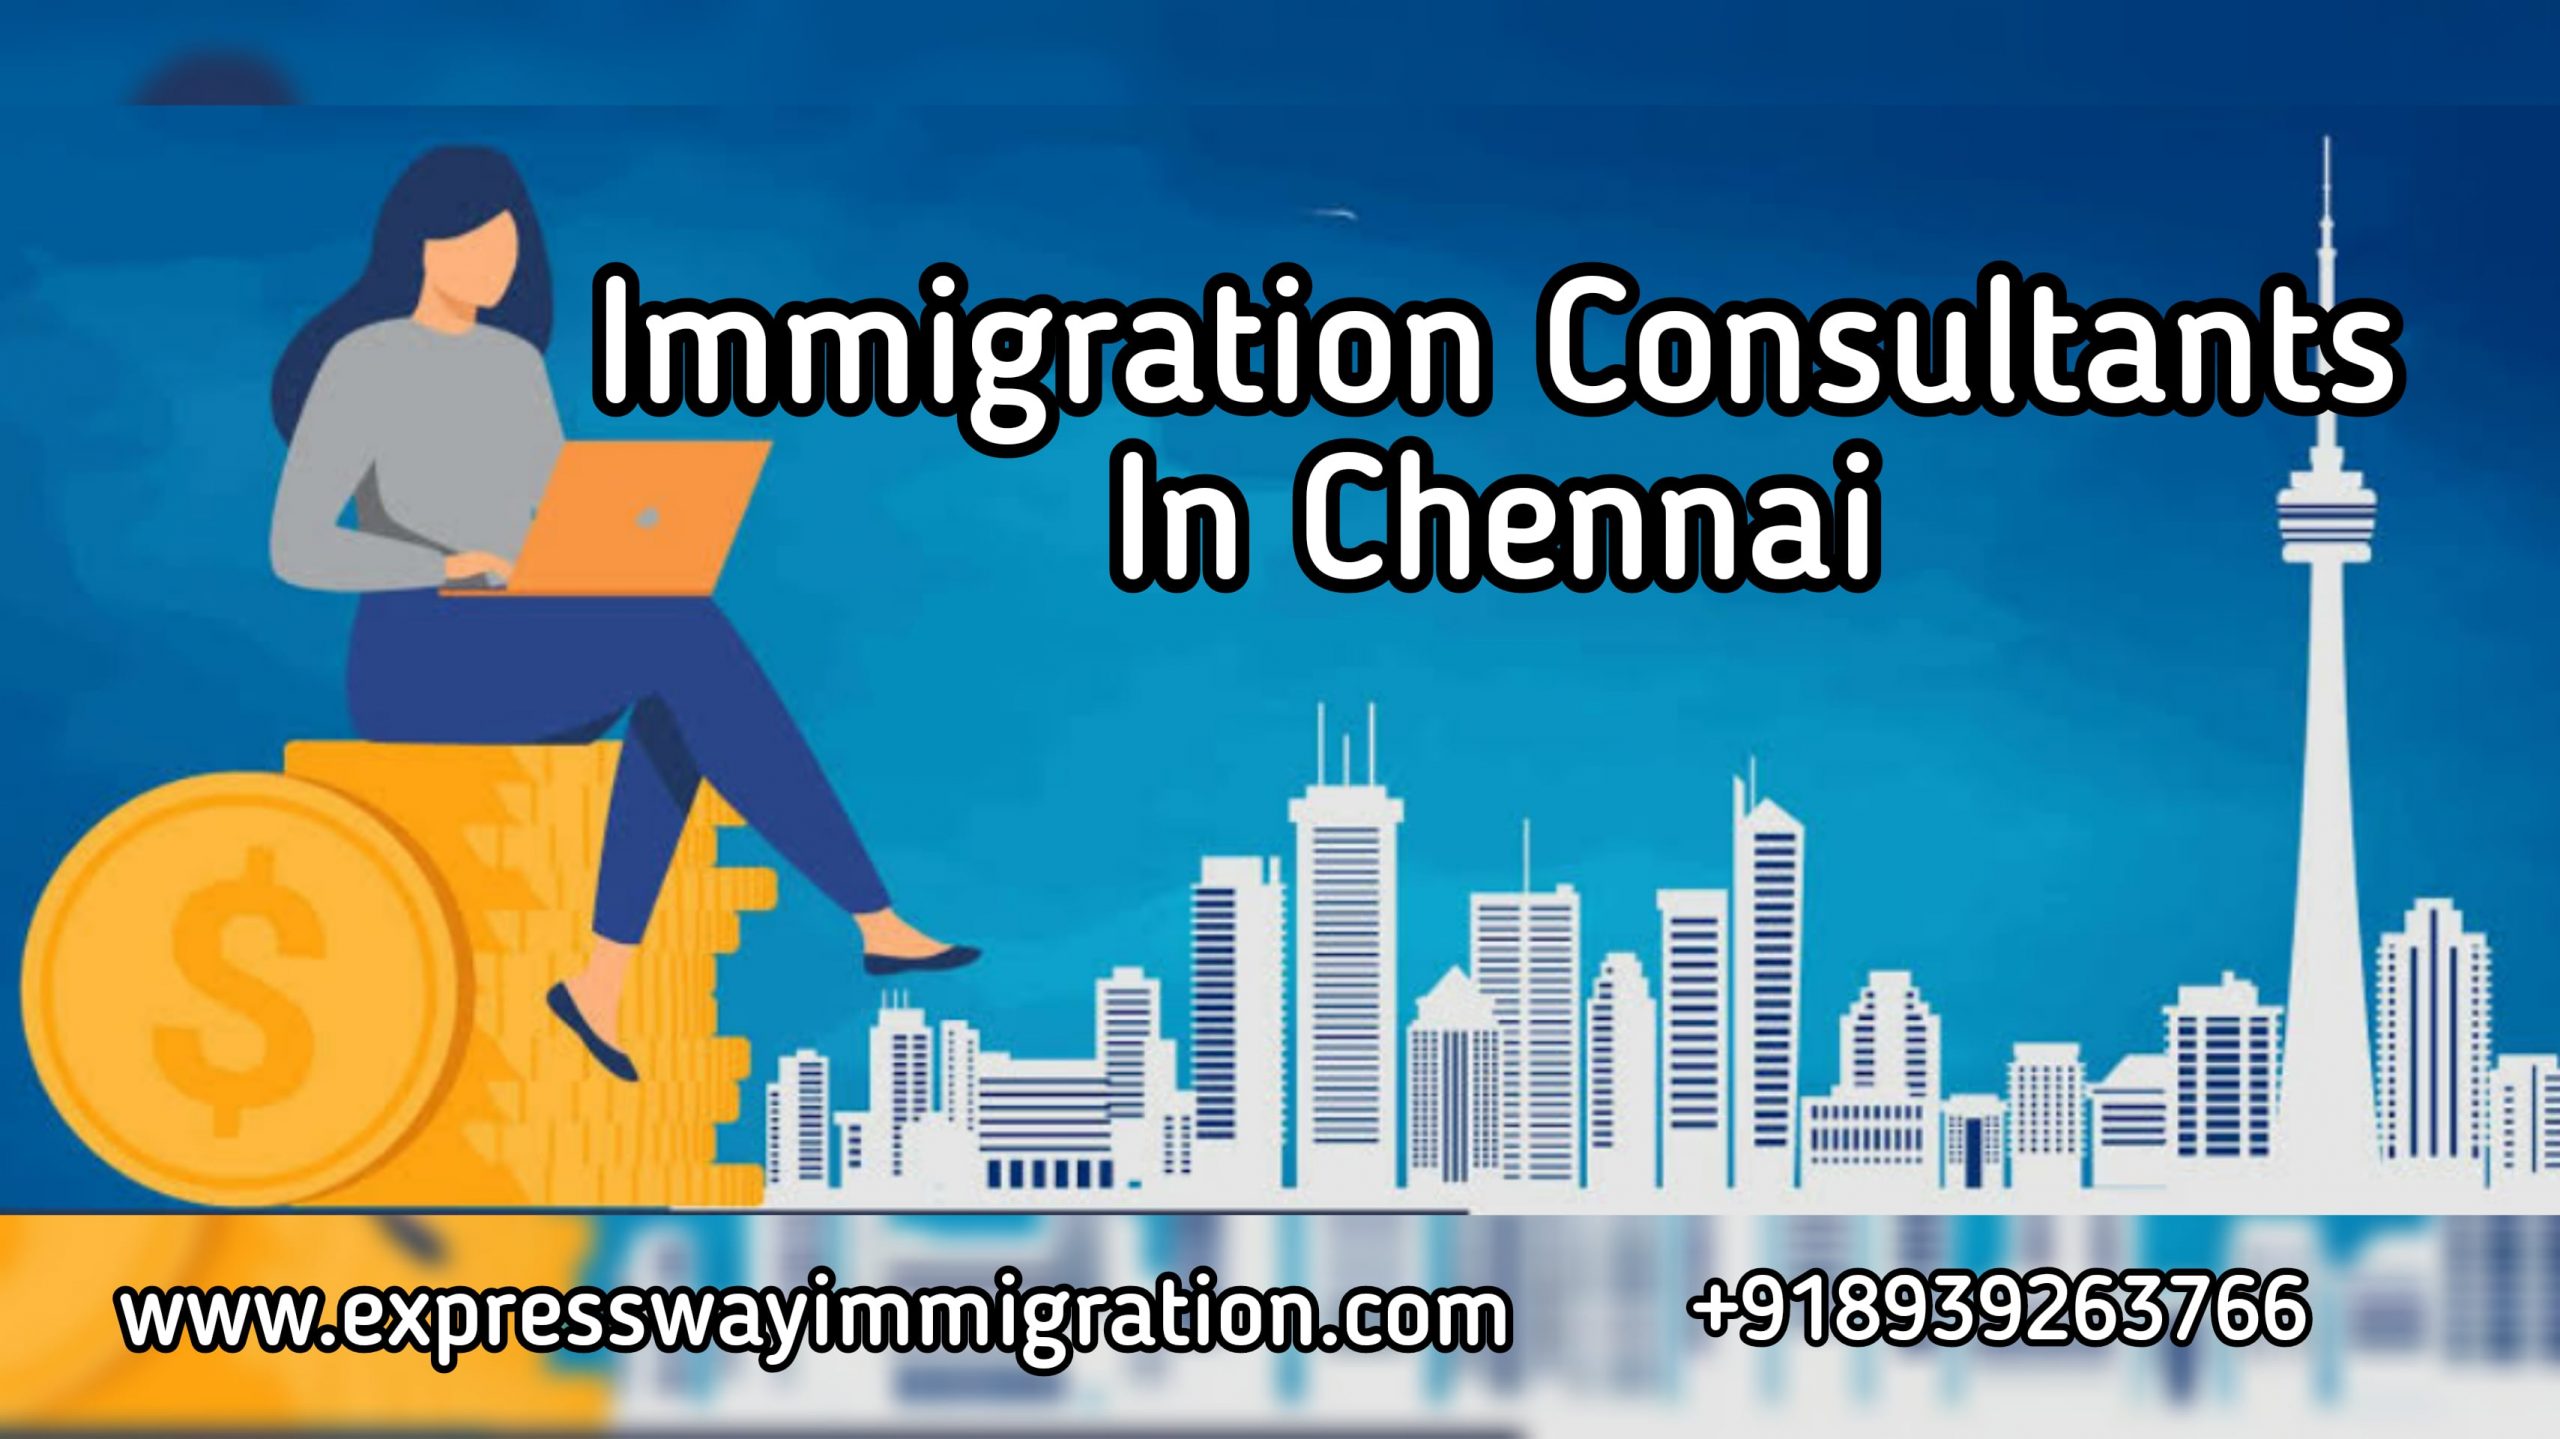 Immigration Consultants in Chennai